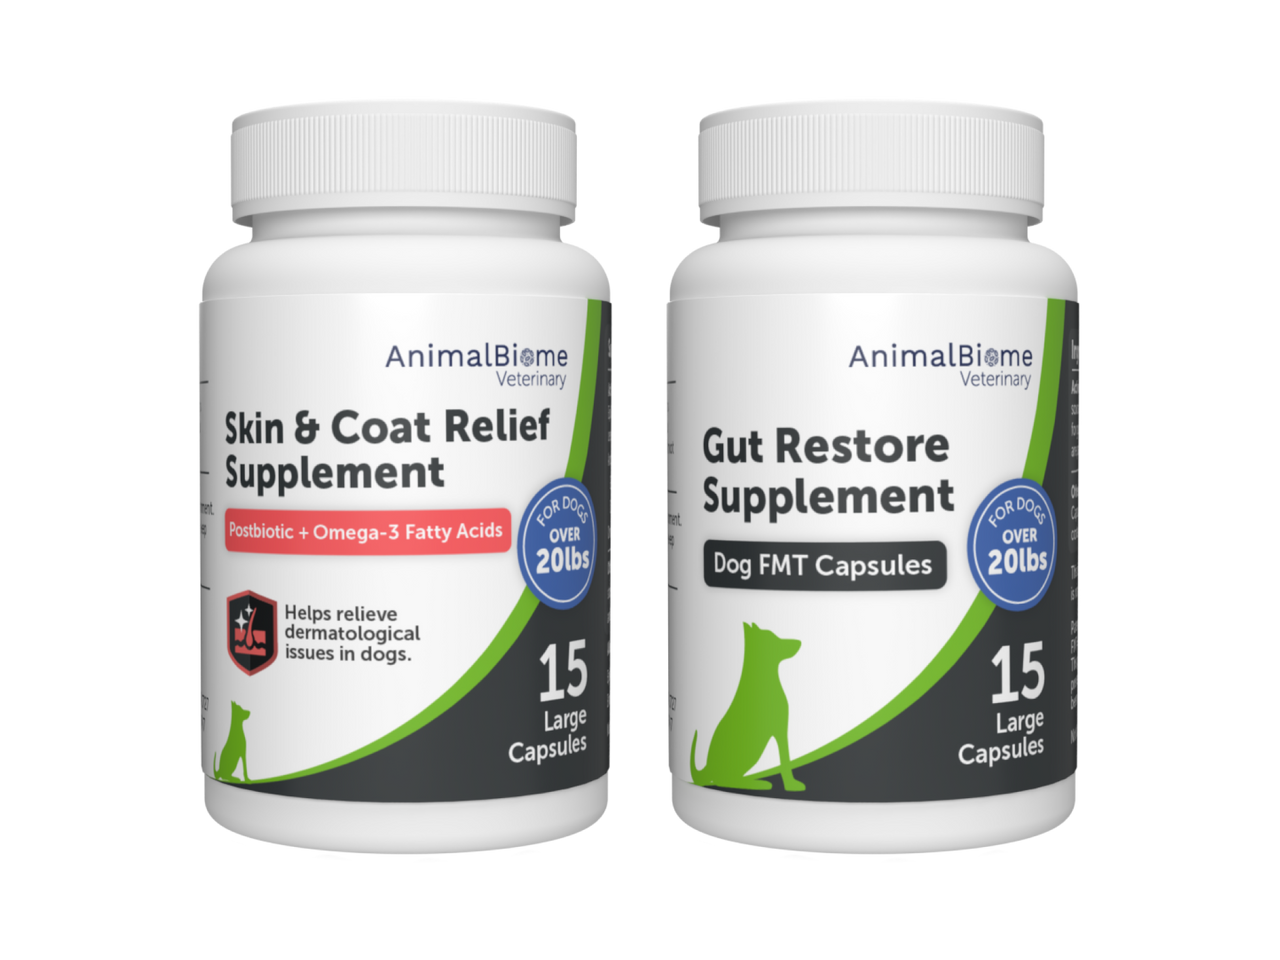 Skin & Coat Relief Kit For Dogs (2 Sizes Available)